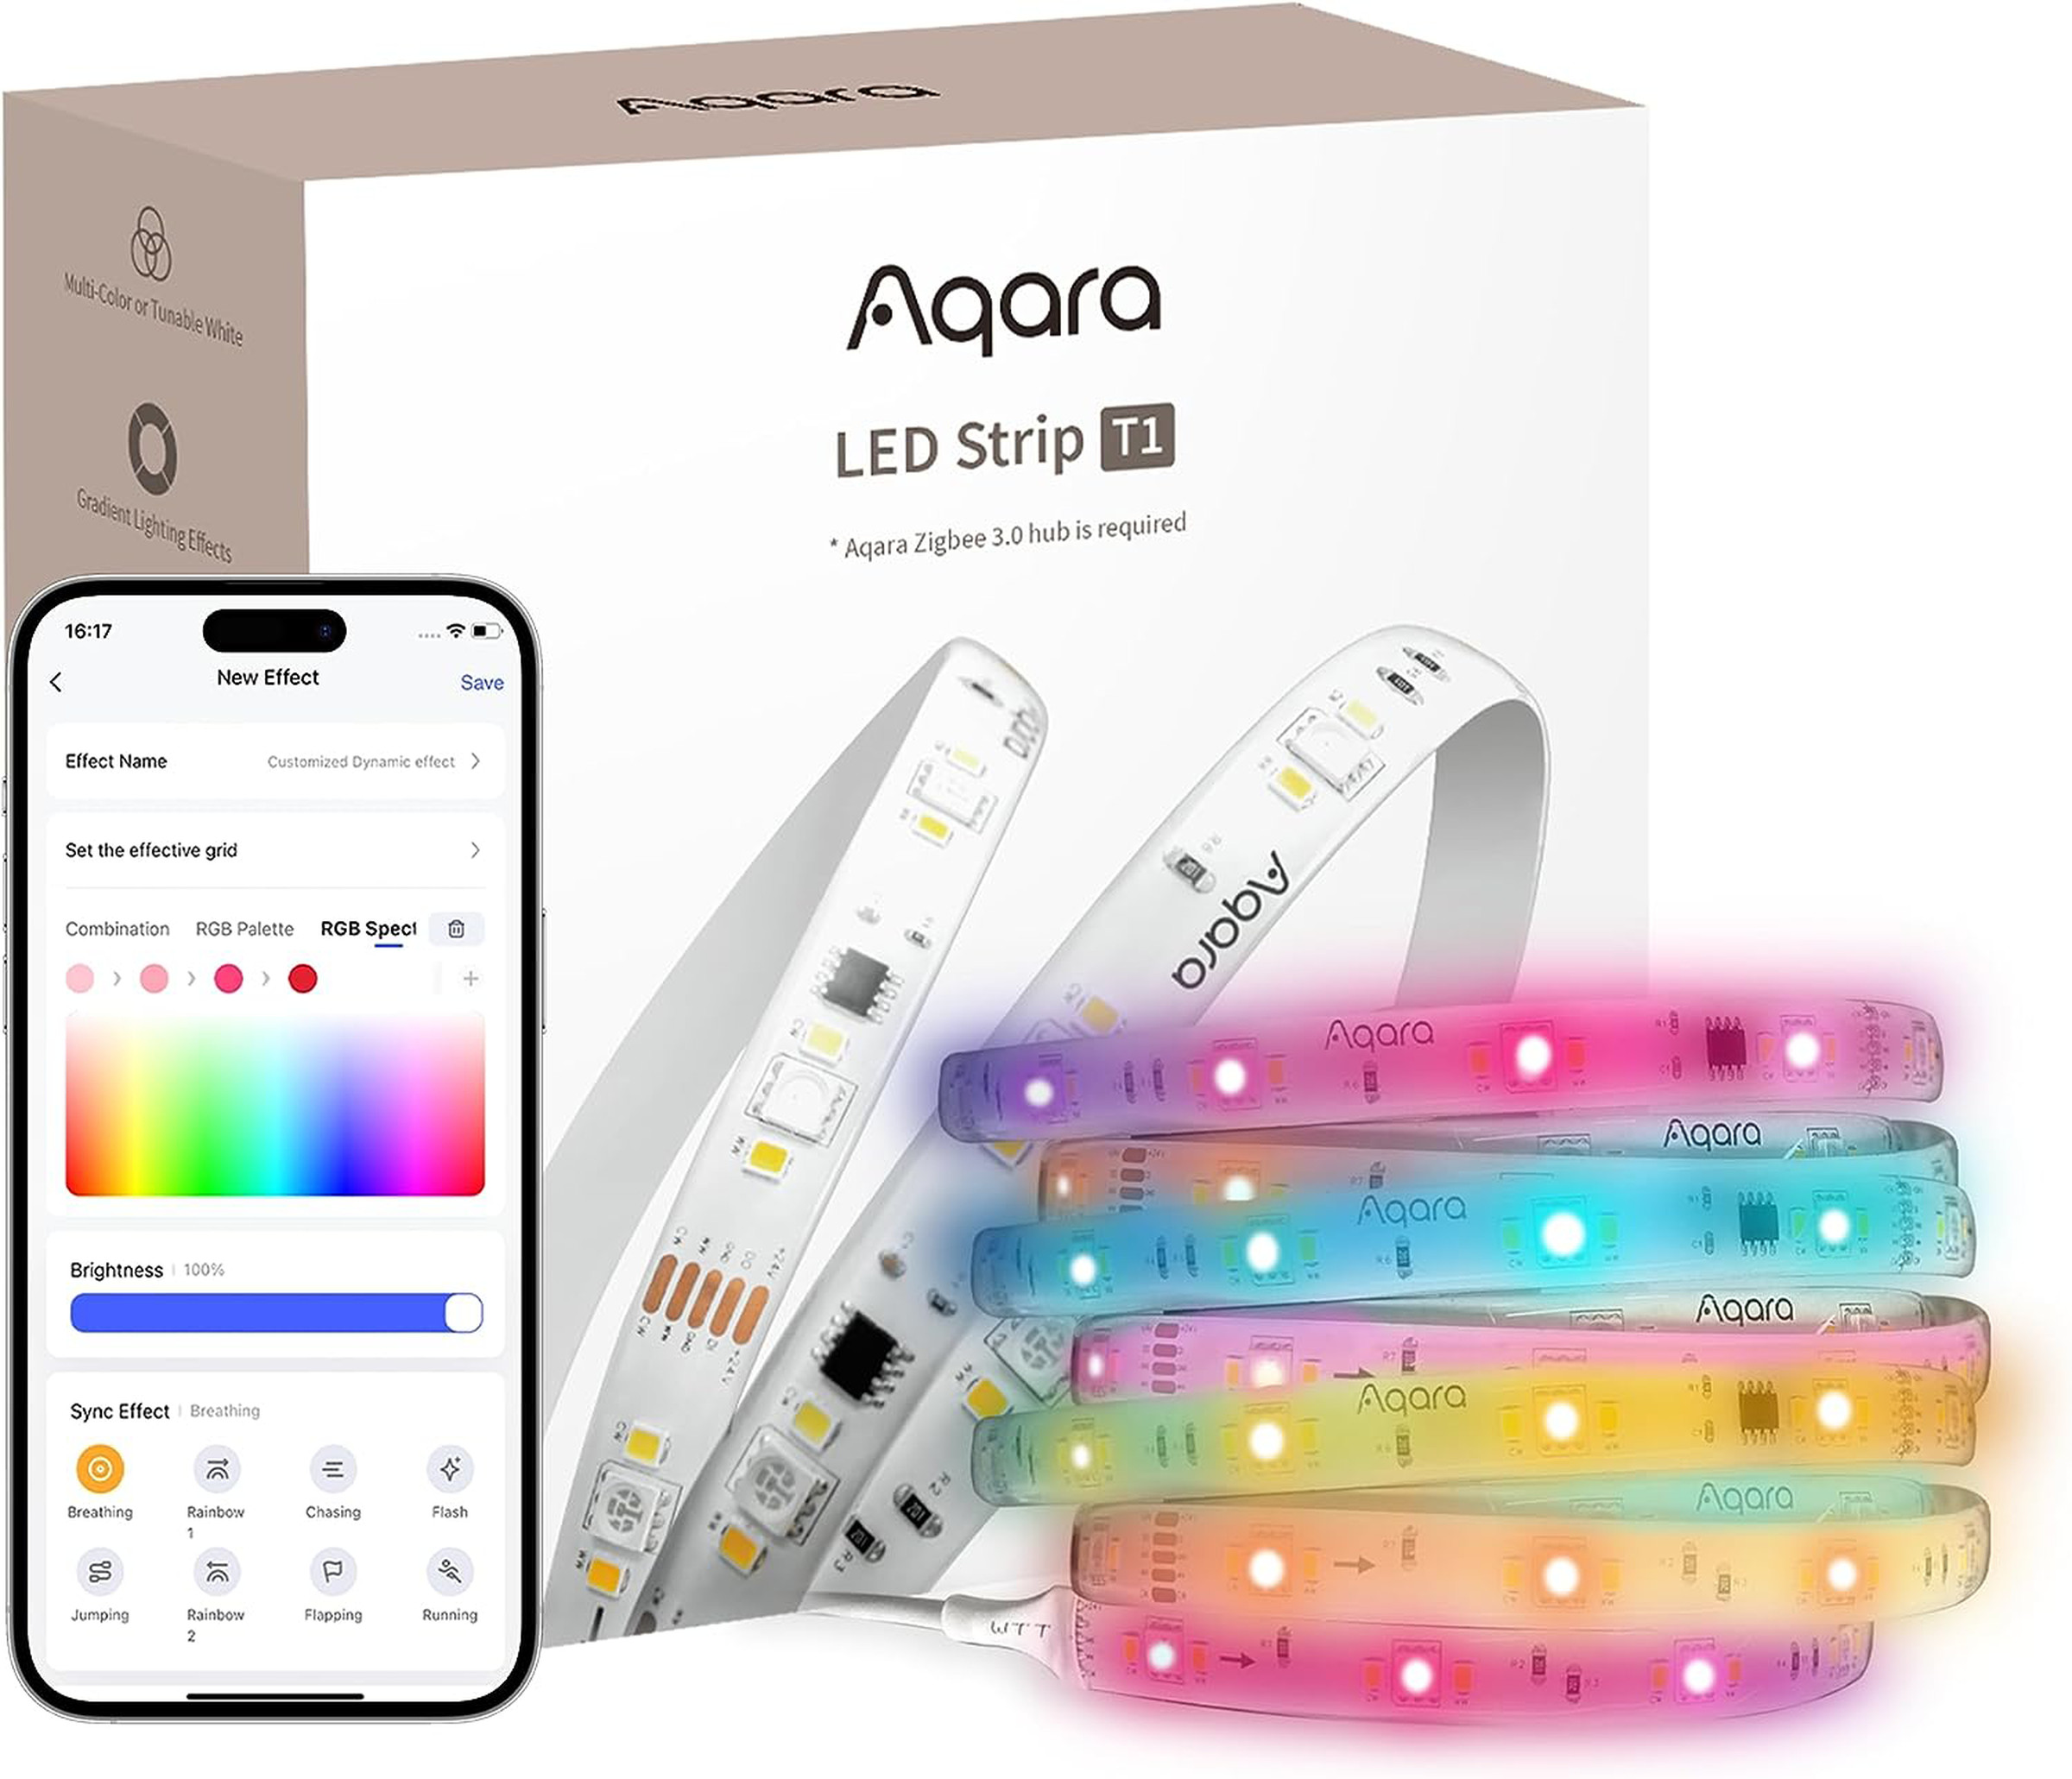 A picture of the Aqara LED Strip T1 box with the lightstrip coiled in front of it and the app loaded on a phone.